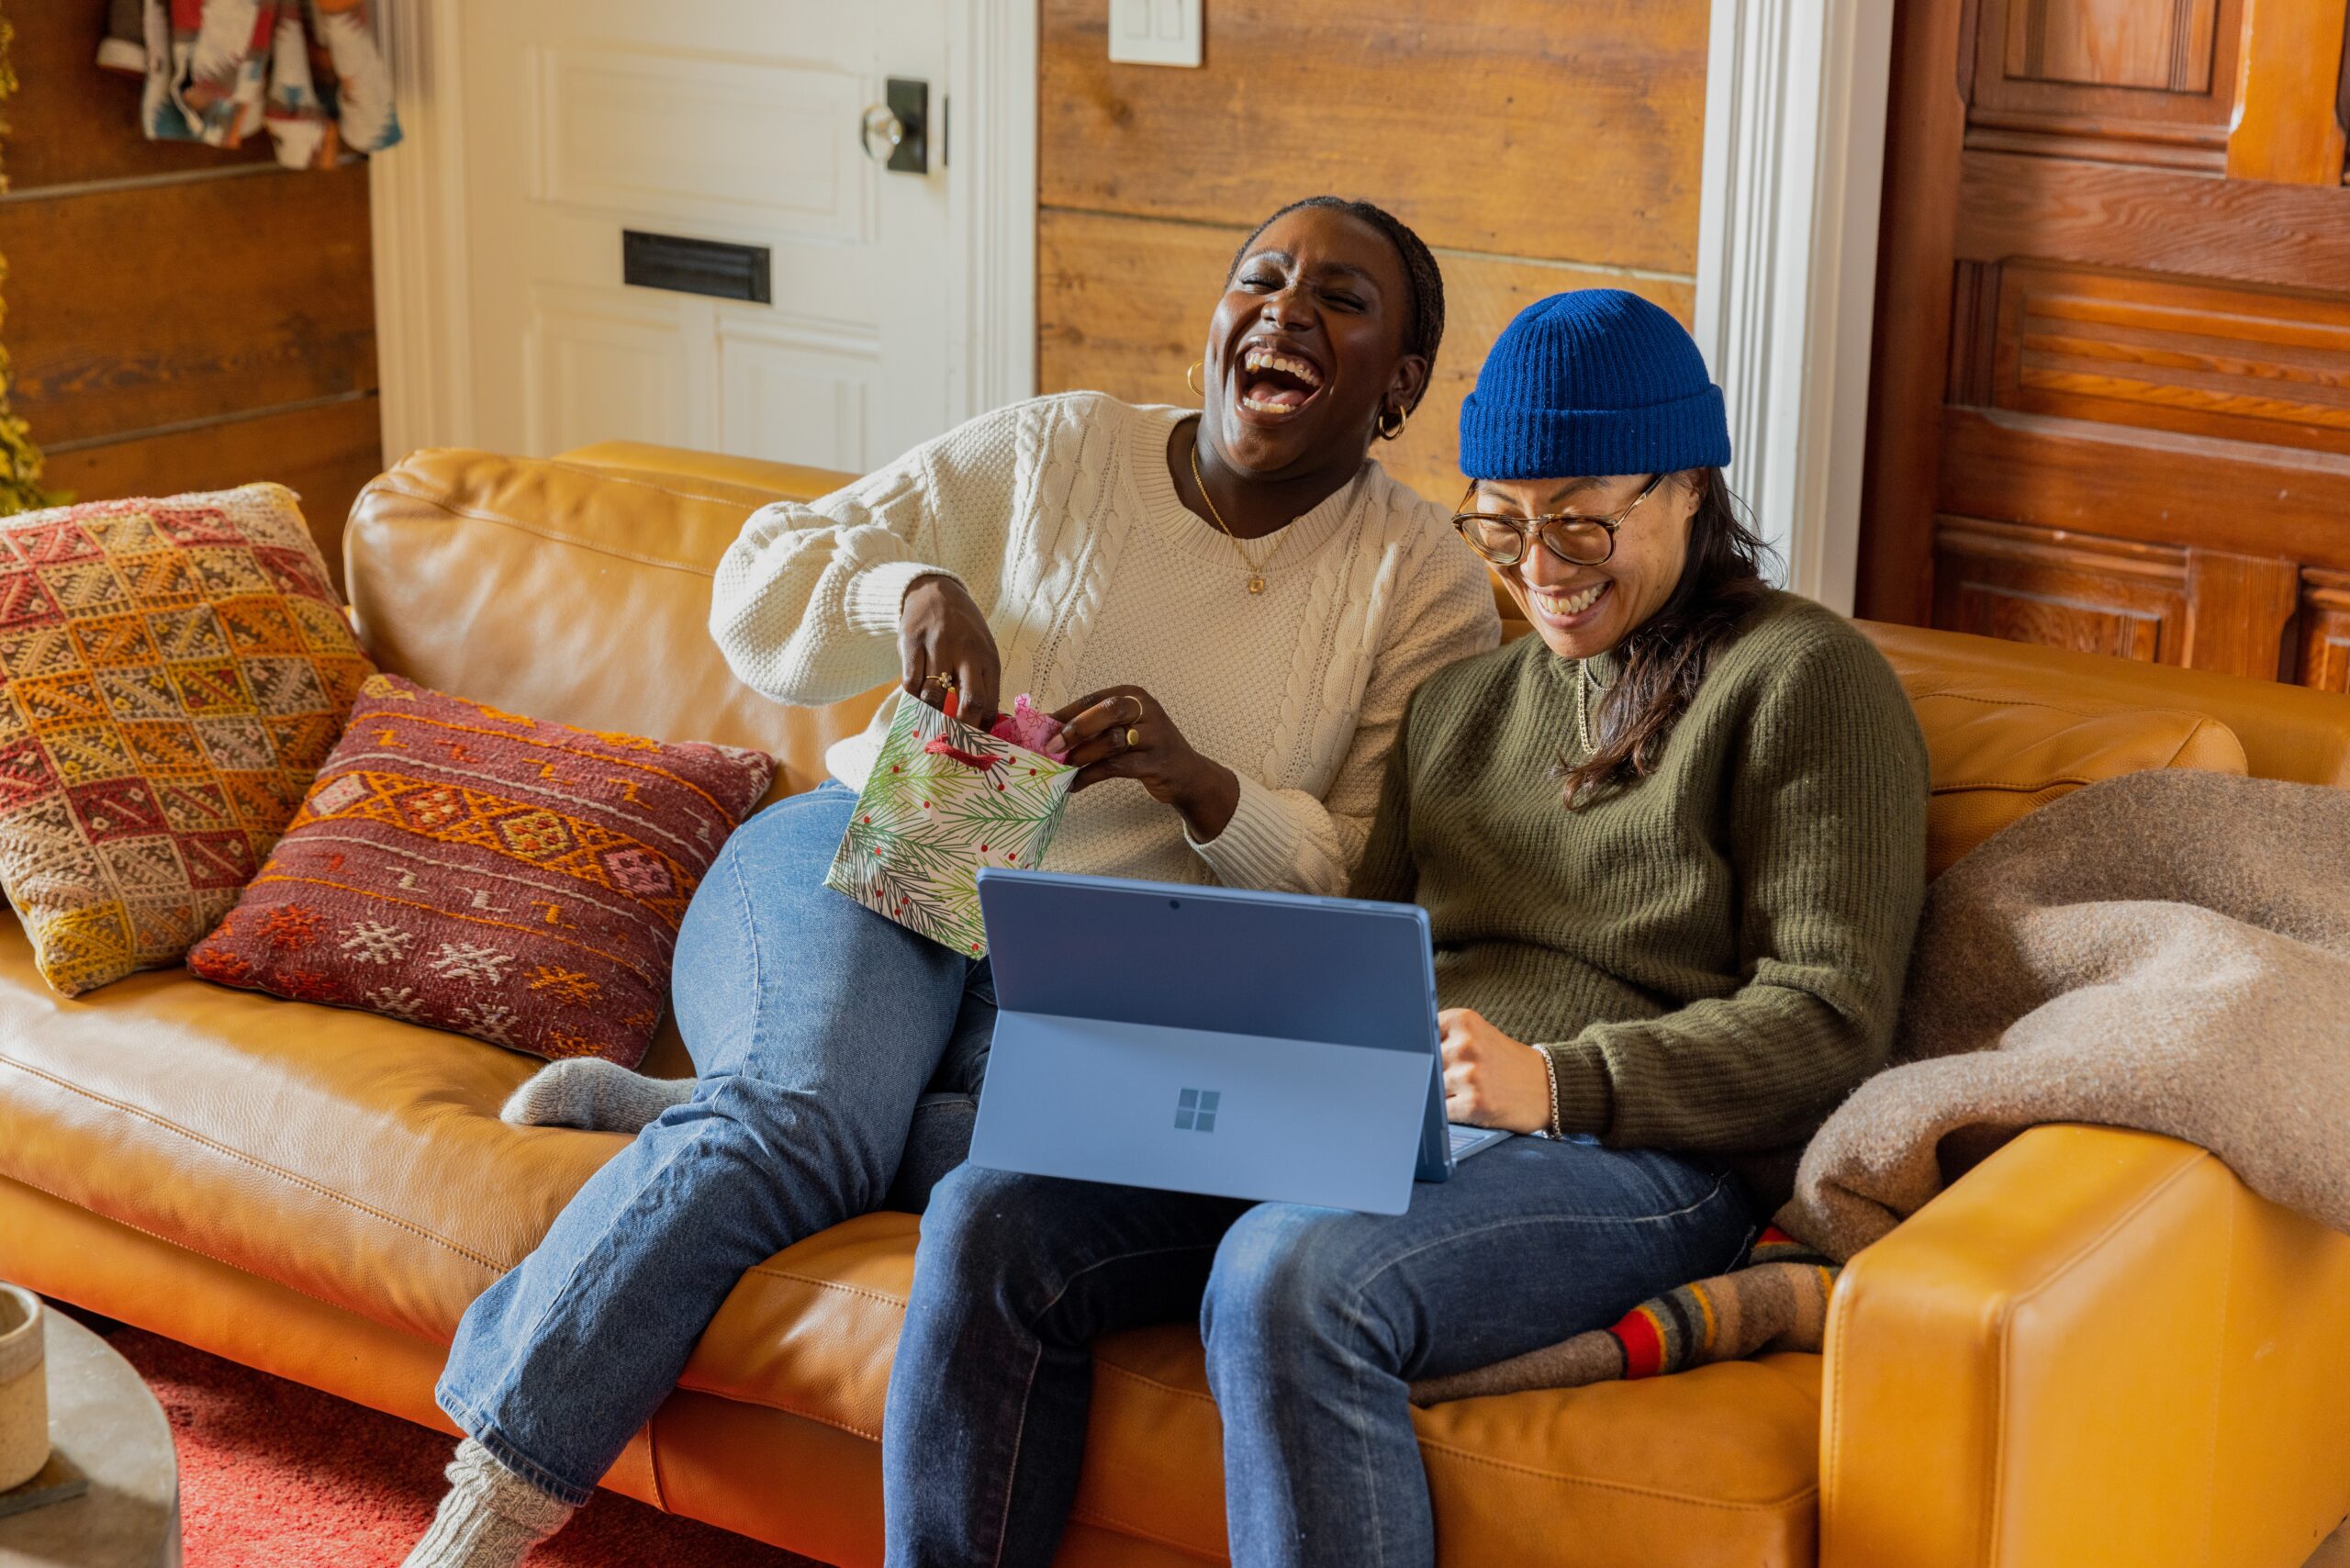 Two women laughing on a couch with a laptop